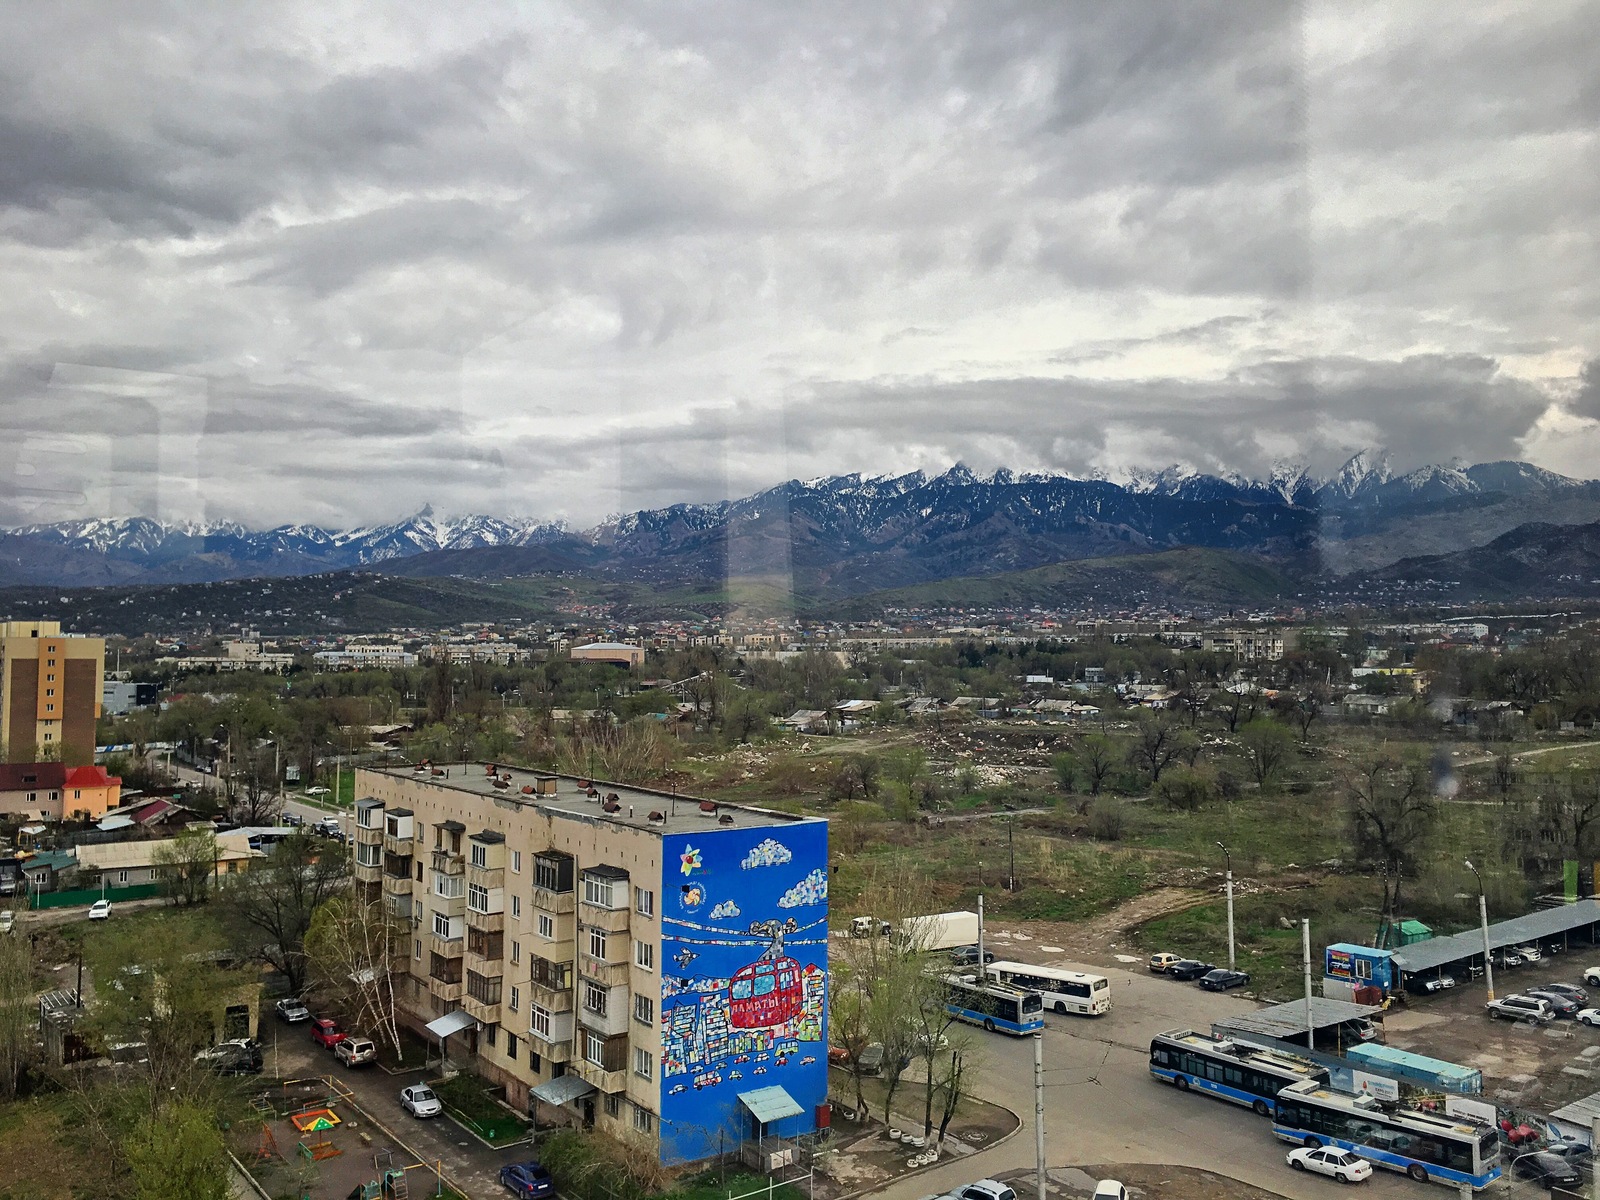 View from the Ferris wheel in front of Mega Mall (Almaty) - My, Town, Road, Sky, The mountains, The photo, My, Kazakhstan